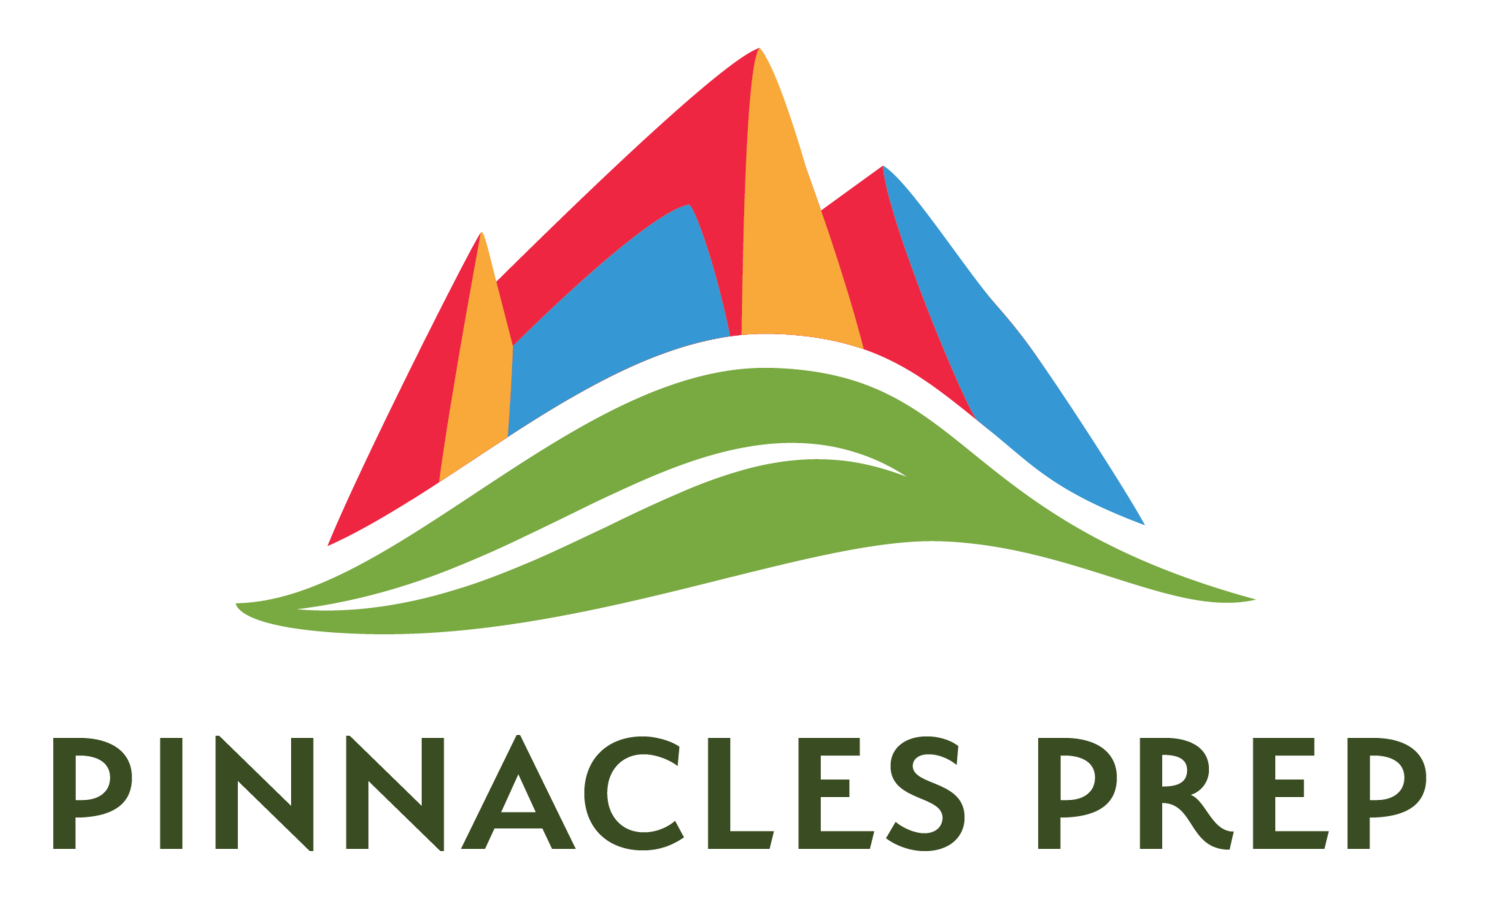 Pinnacles Prep Logo - Red, Orange, and Blue stylized mountain range above the words Pinnacles Prep in green letters.